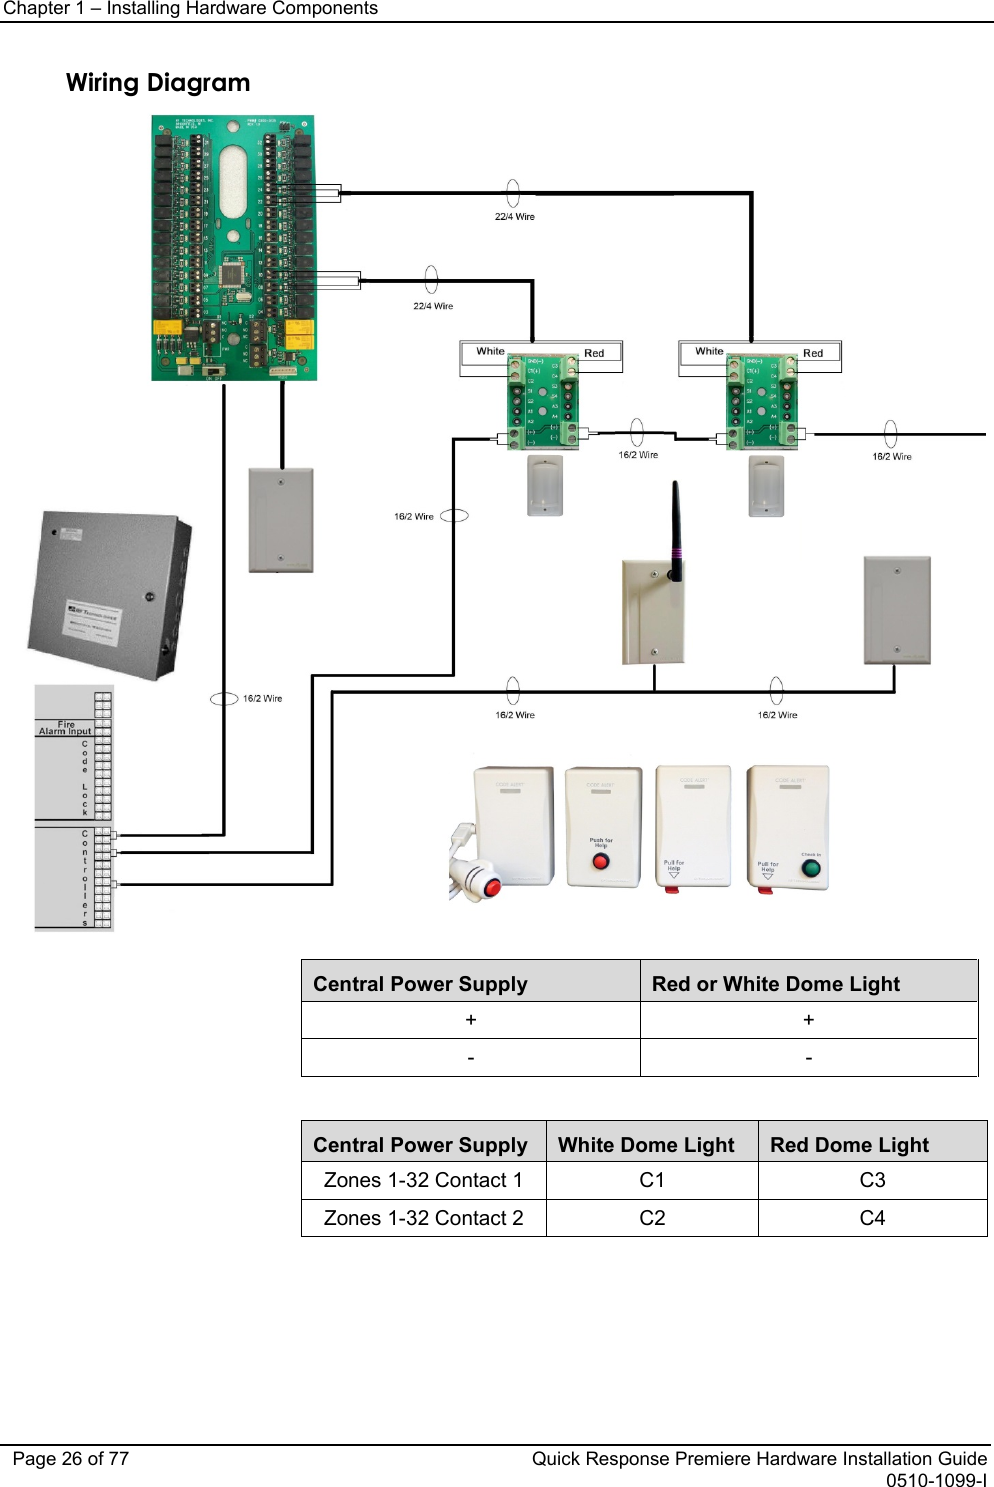 Chapter 1 – Installing Hardware Components   Page 26 of 77 Quick Response Premiere Hardware Installation Guide 0510-1099-I Wiring Diagram   Central Power Supply Red or White Dome Light +  + -  -      Central Power Supply White Dome Light Red Dome Light Zones 1-32 Contact 1 C1 C3 Zones 1-32 Contact 2 C2 C4     